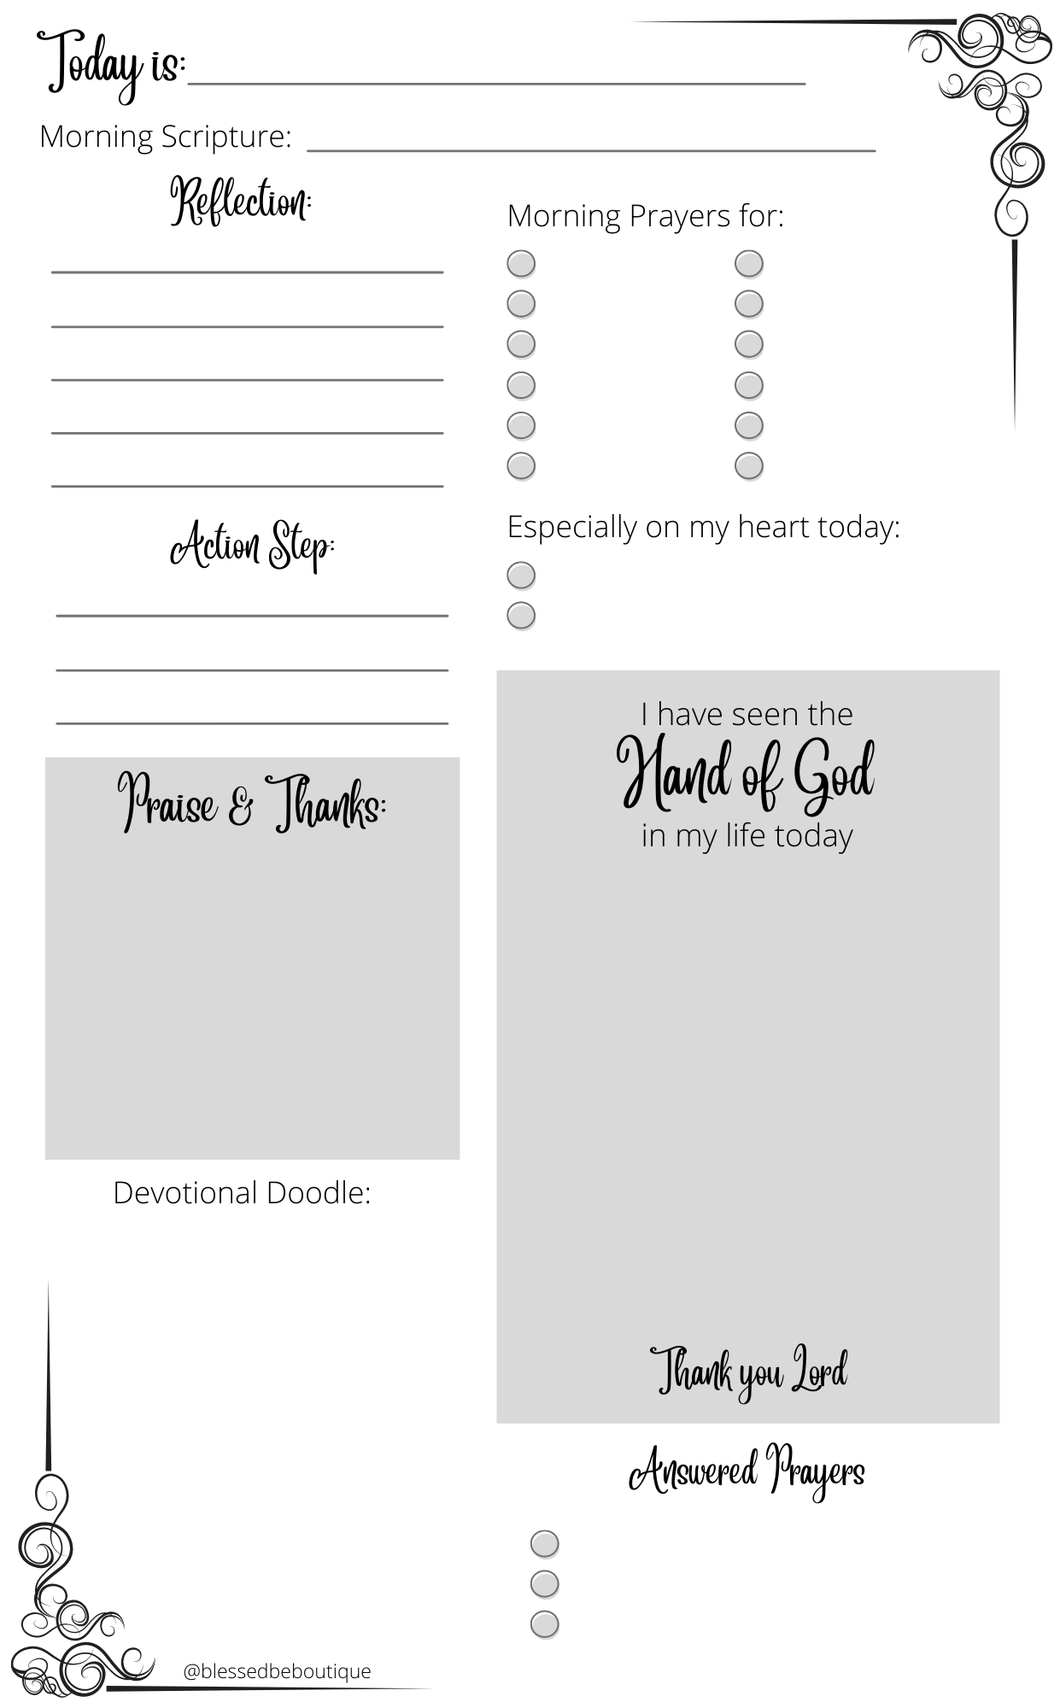 Daily Scripture Journal Template - Blessed Be Boutique